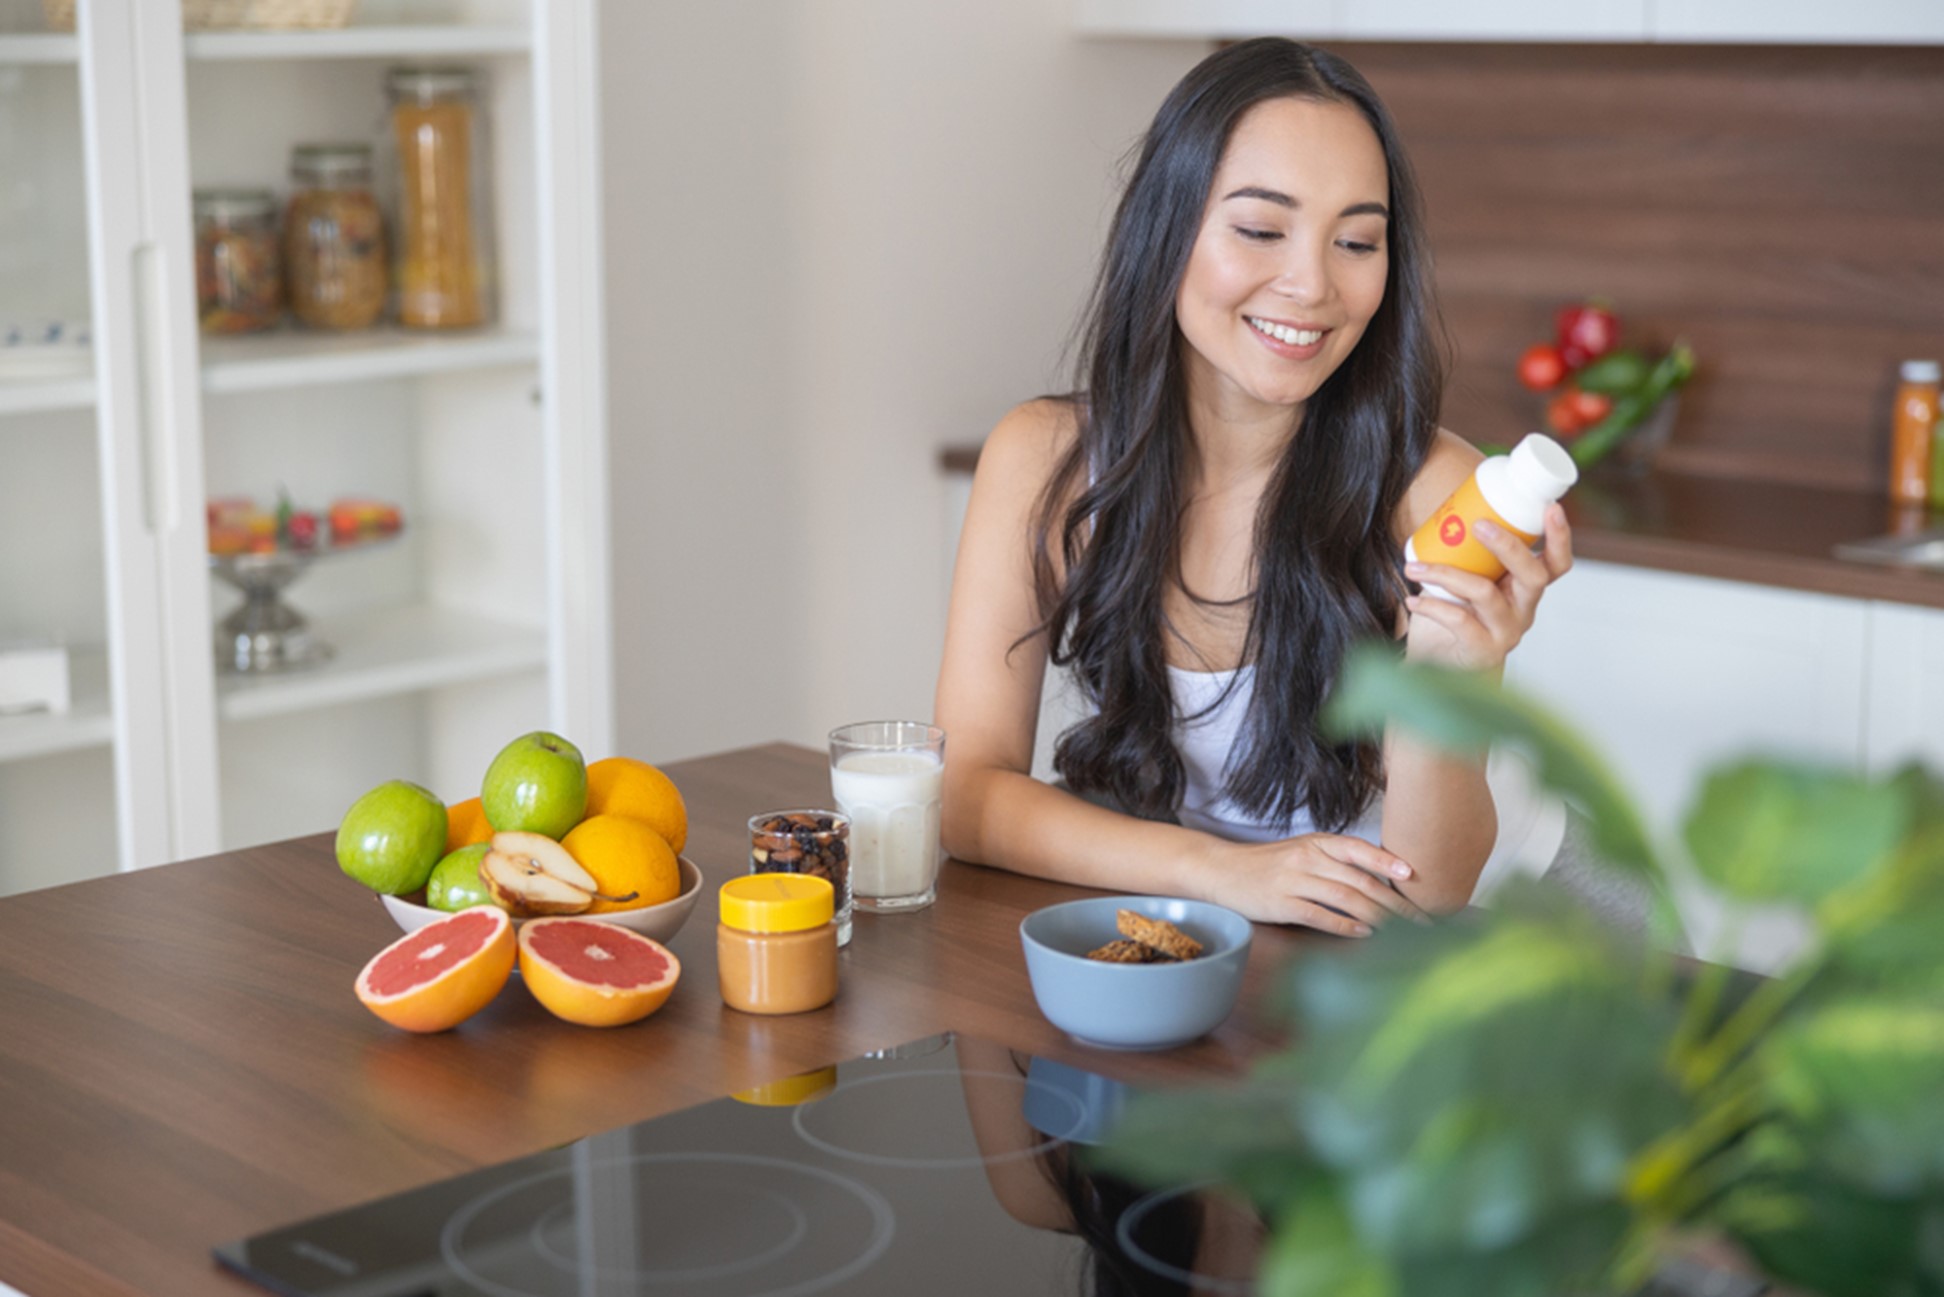 A woman smiling at a bottle of vitamins while sitting at her kitchen table next to fresh fruit.